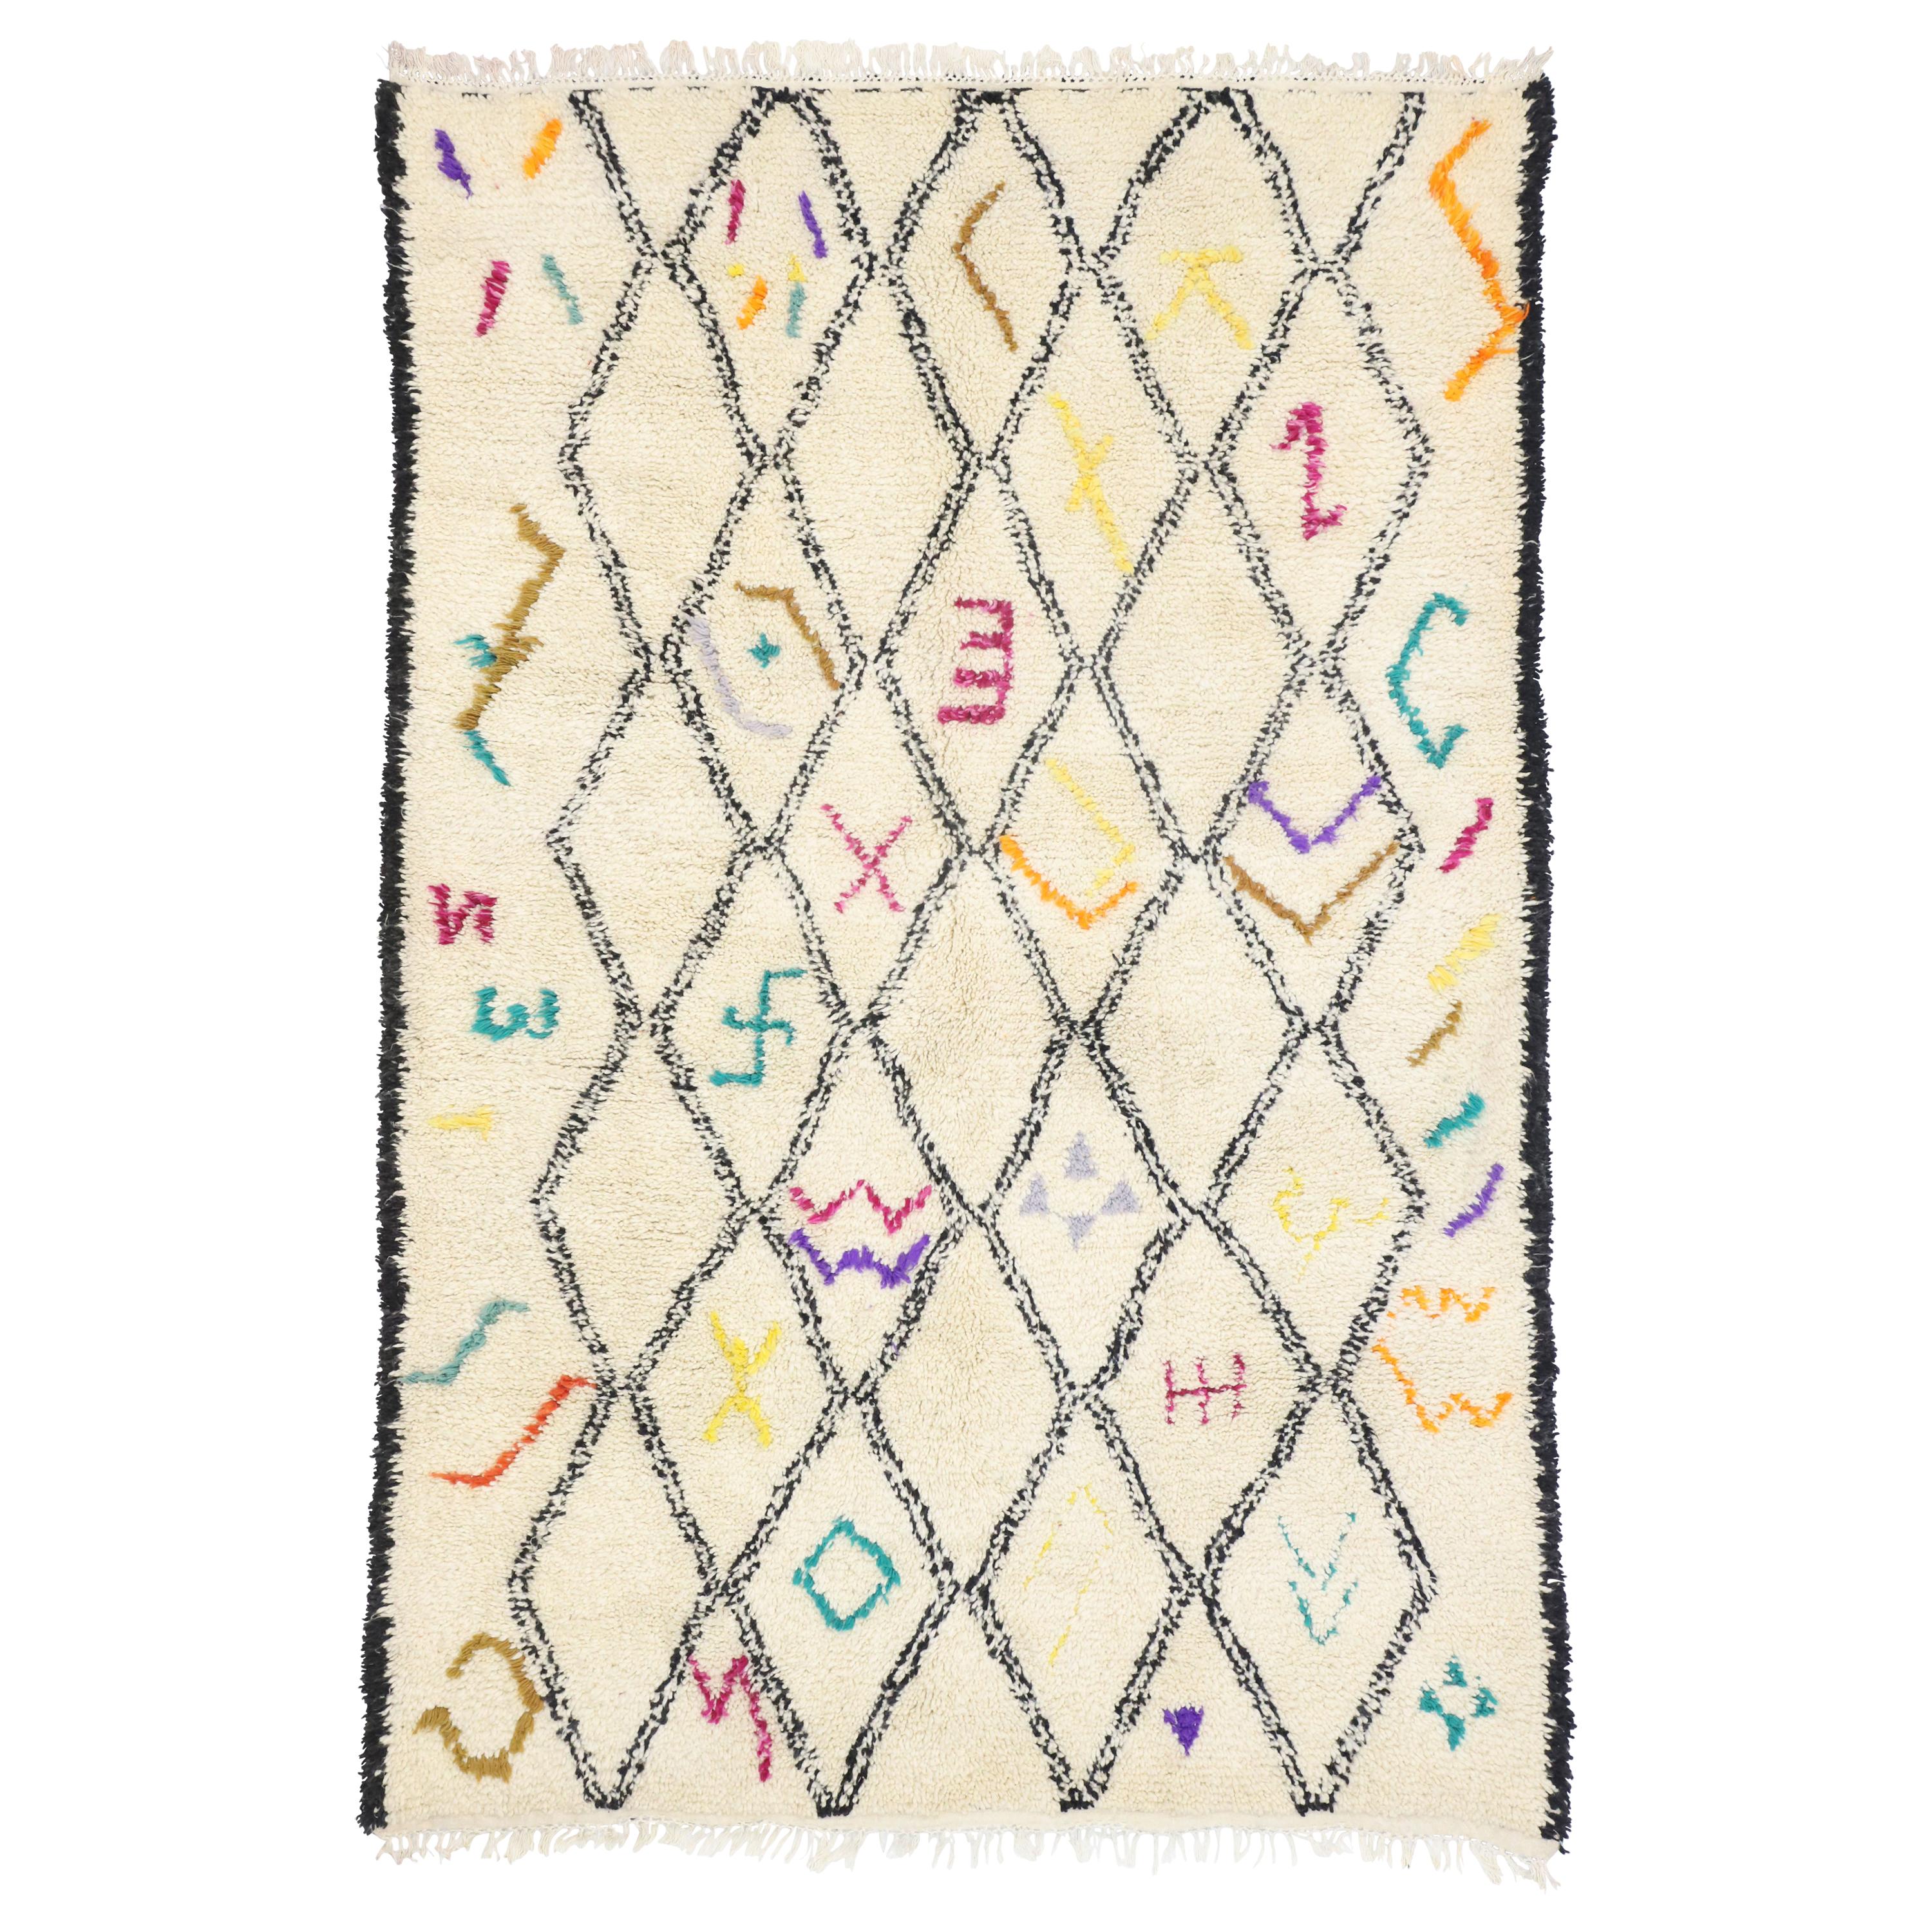 New Contemporary Berber Moroccan Azilal Rug with Hygge Bohemian Tribal Style